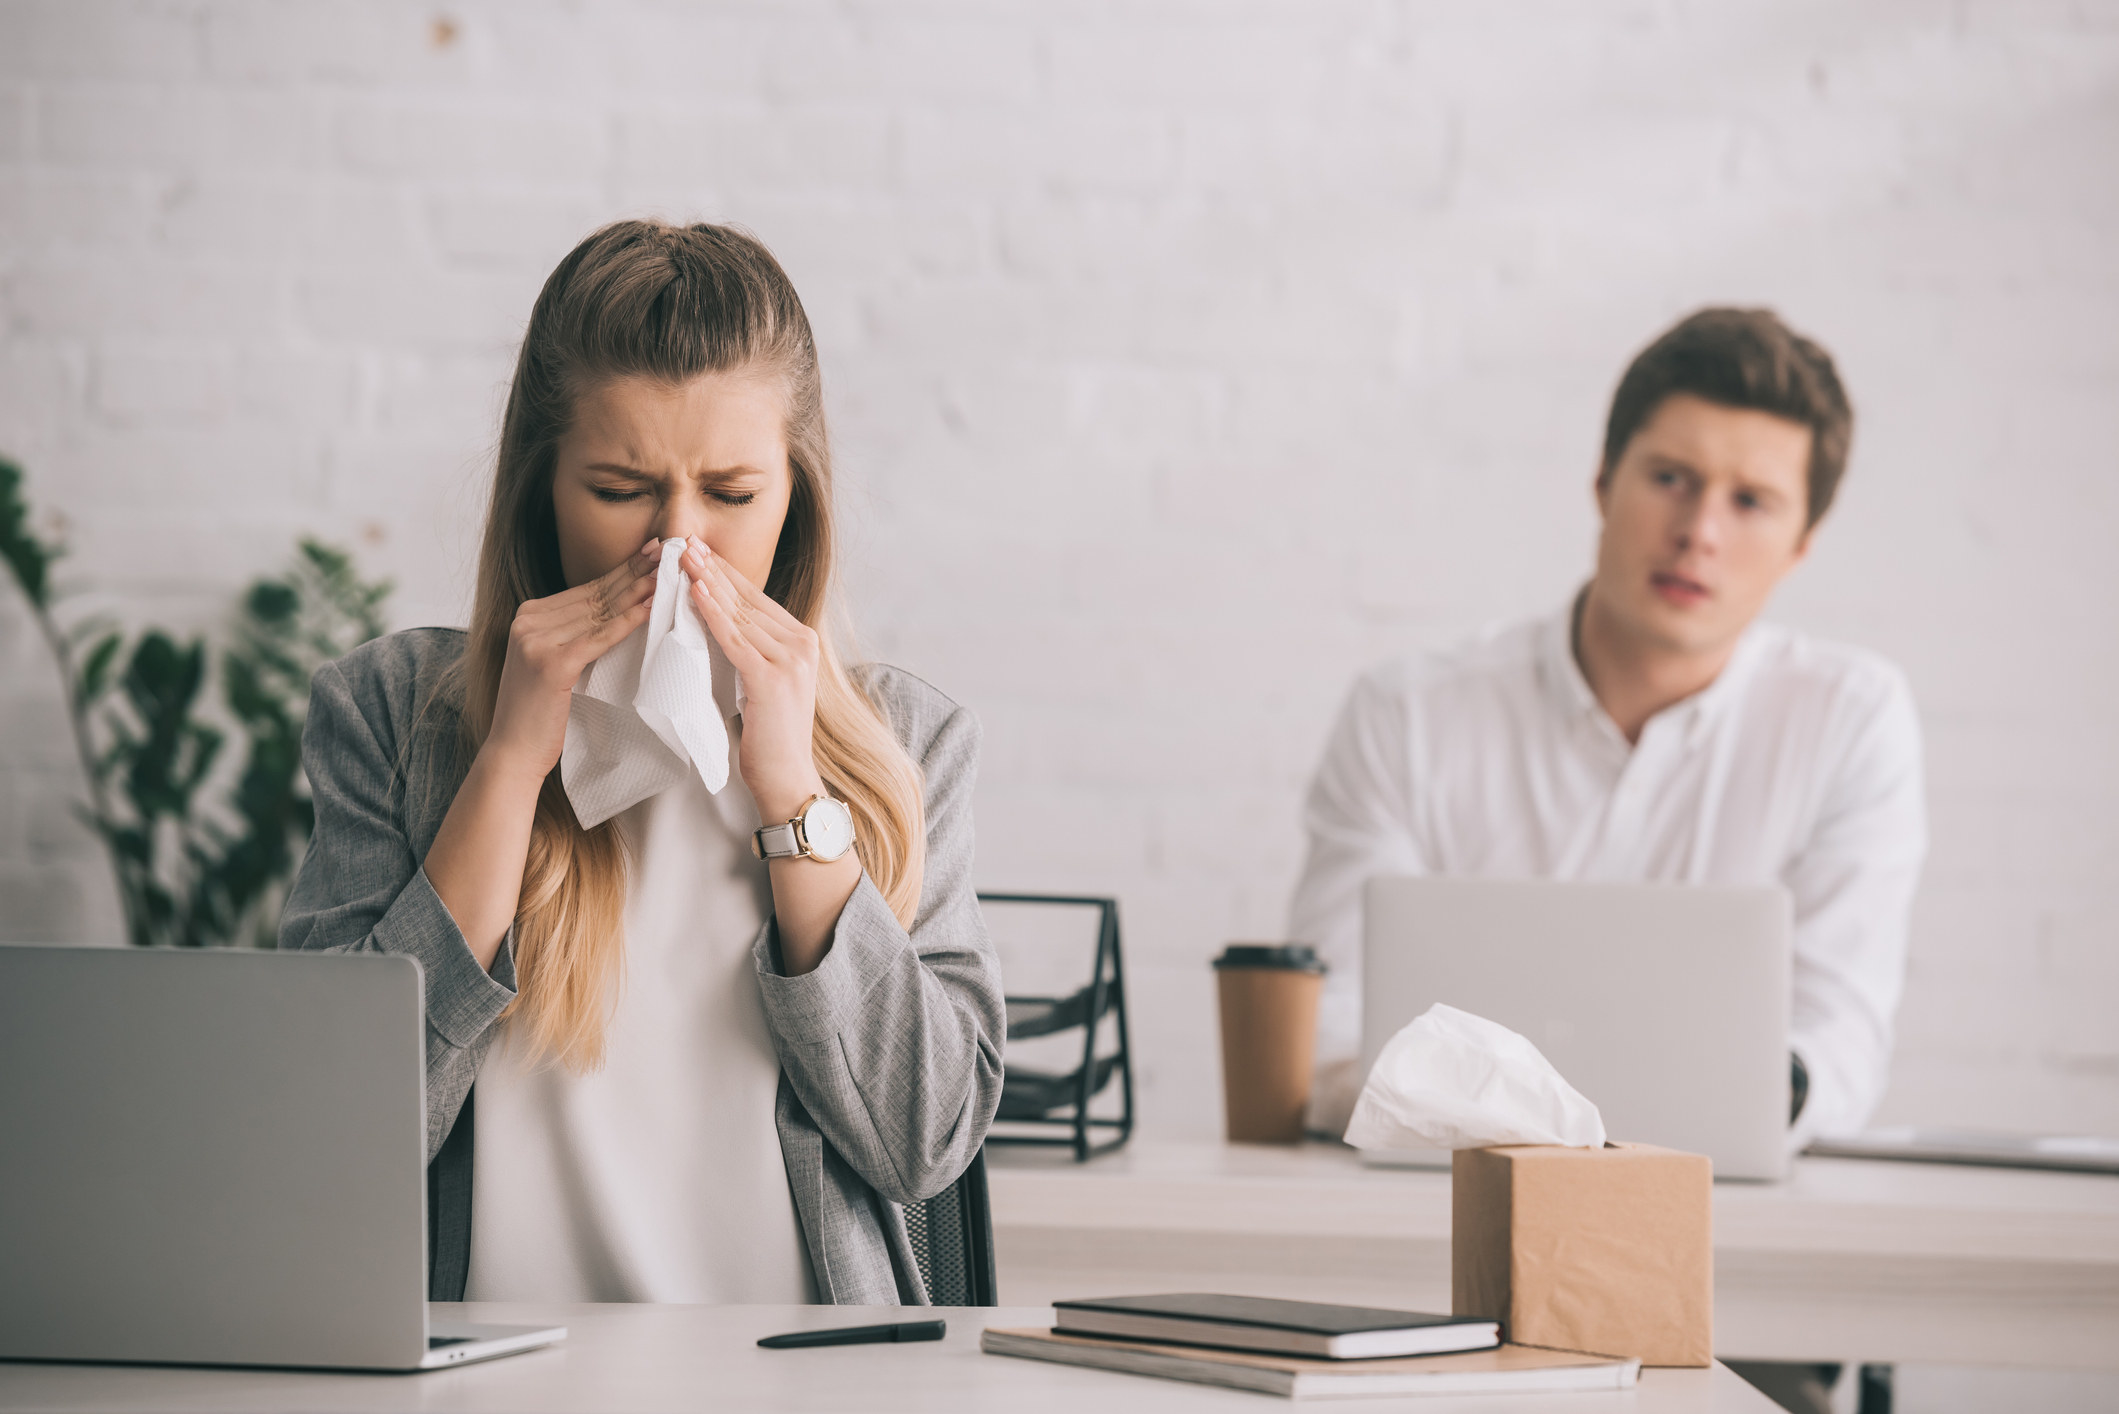 Business person sneezing into a tissue near a coworker. 